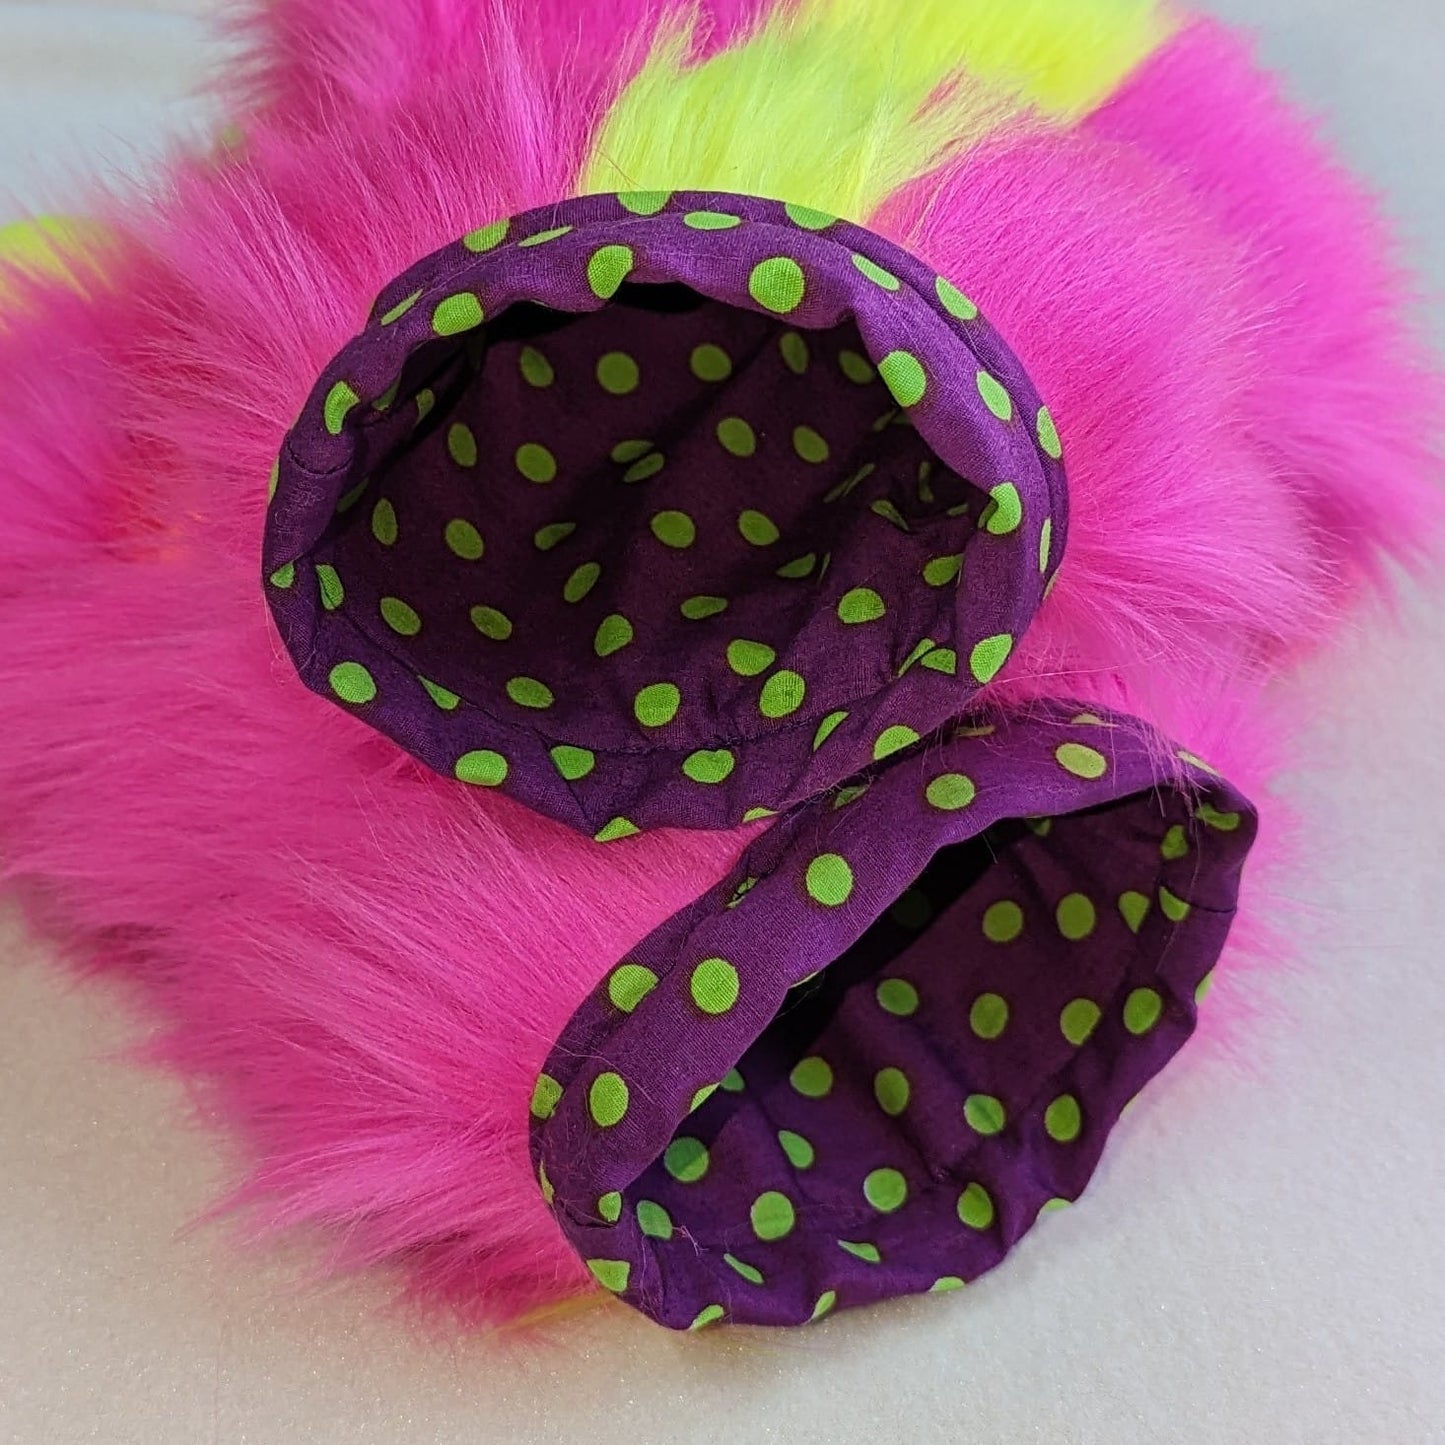 Hand Paws "Neon pink" Special Edition!